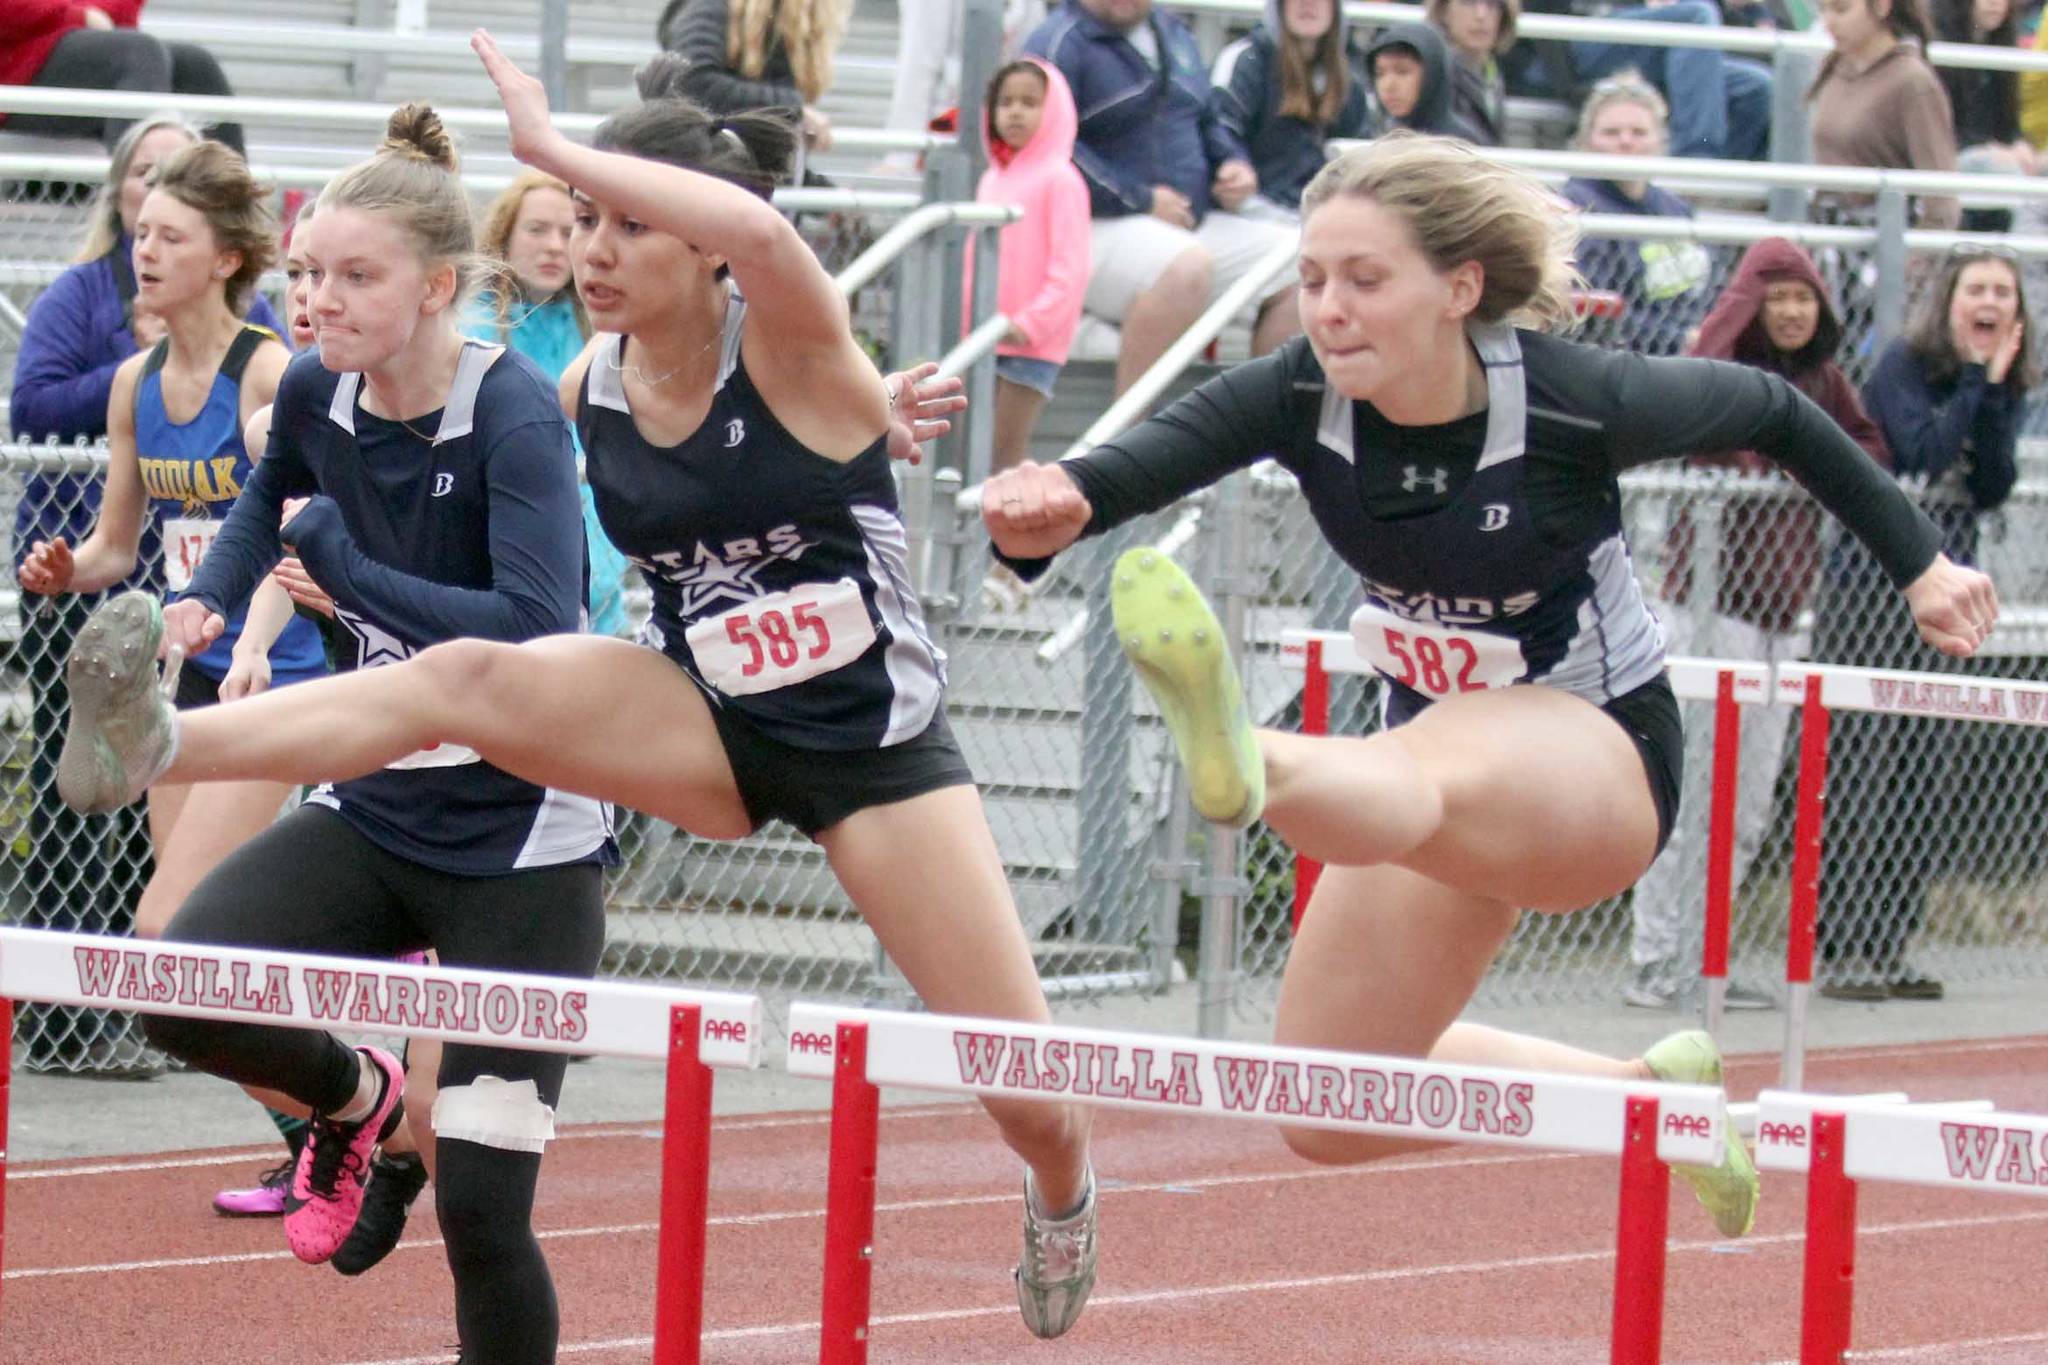 Soldotna’s Angelina Chavarria and Emma Brantley clear a hurdle during the Division I girls 100-meter hurdles in the Region 3 Championshps on Saturday, May 22, 2021, at Wasilla High School. (Photo by Jeremiah Bartz/Frontiersman)